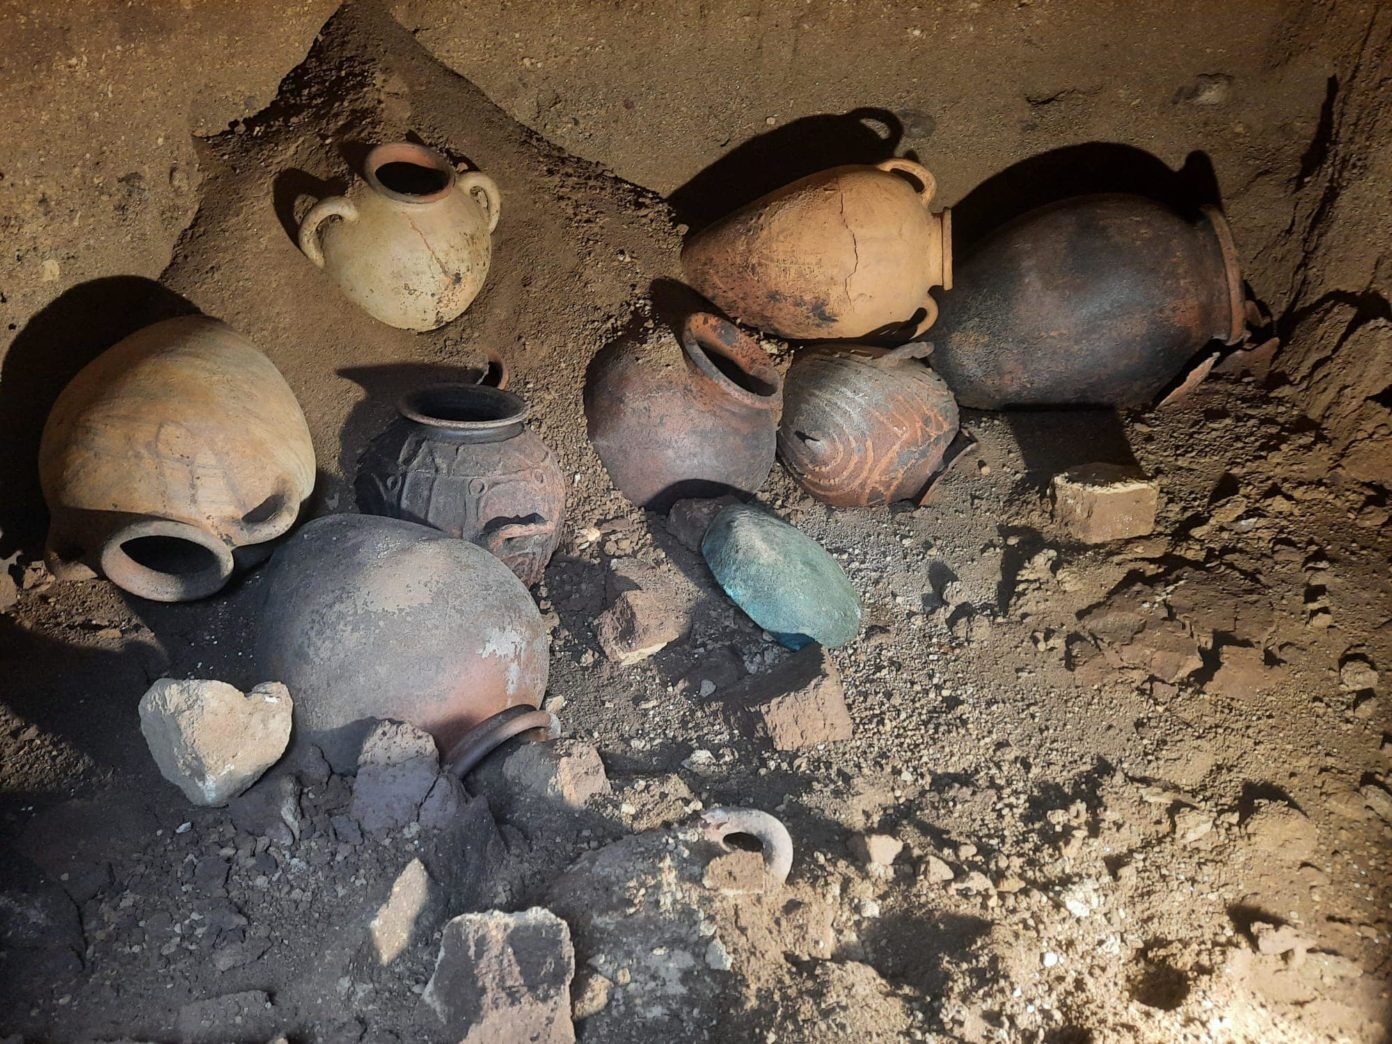 In Italy, Greek amphorae for wine were discovered in an ancient tomb (photo)